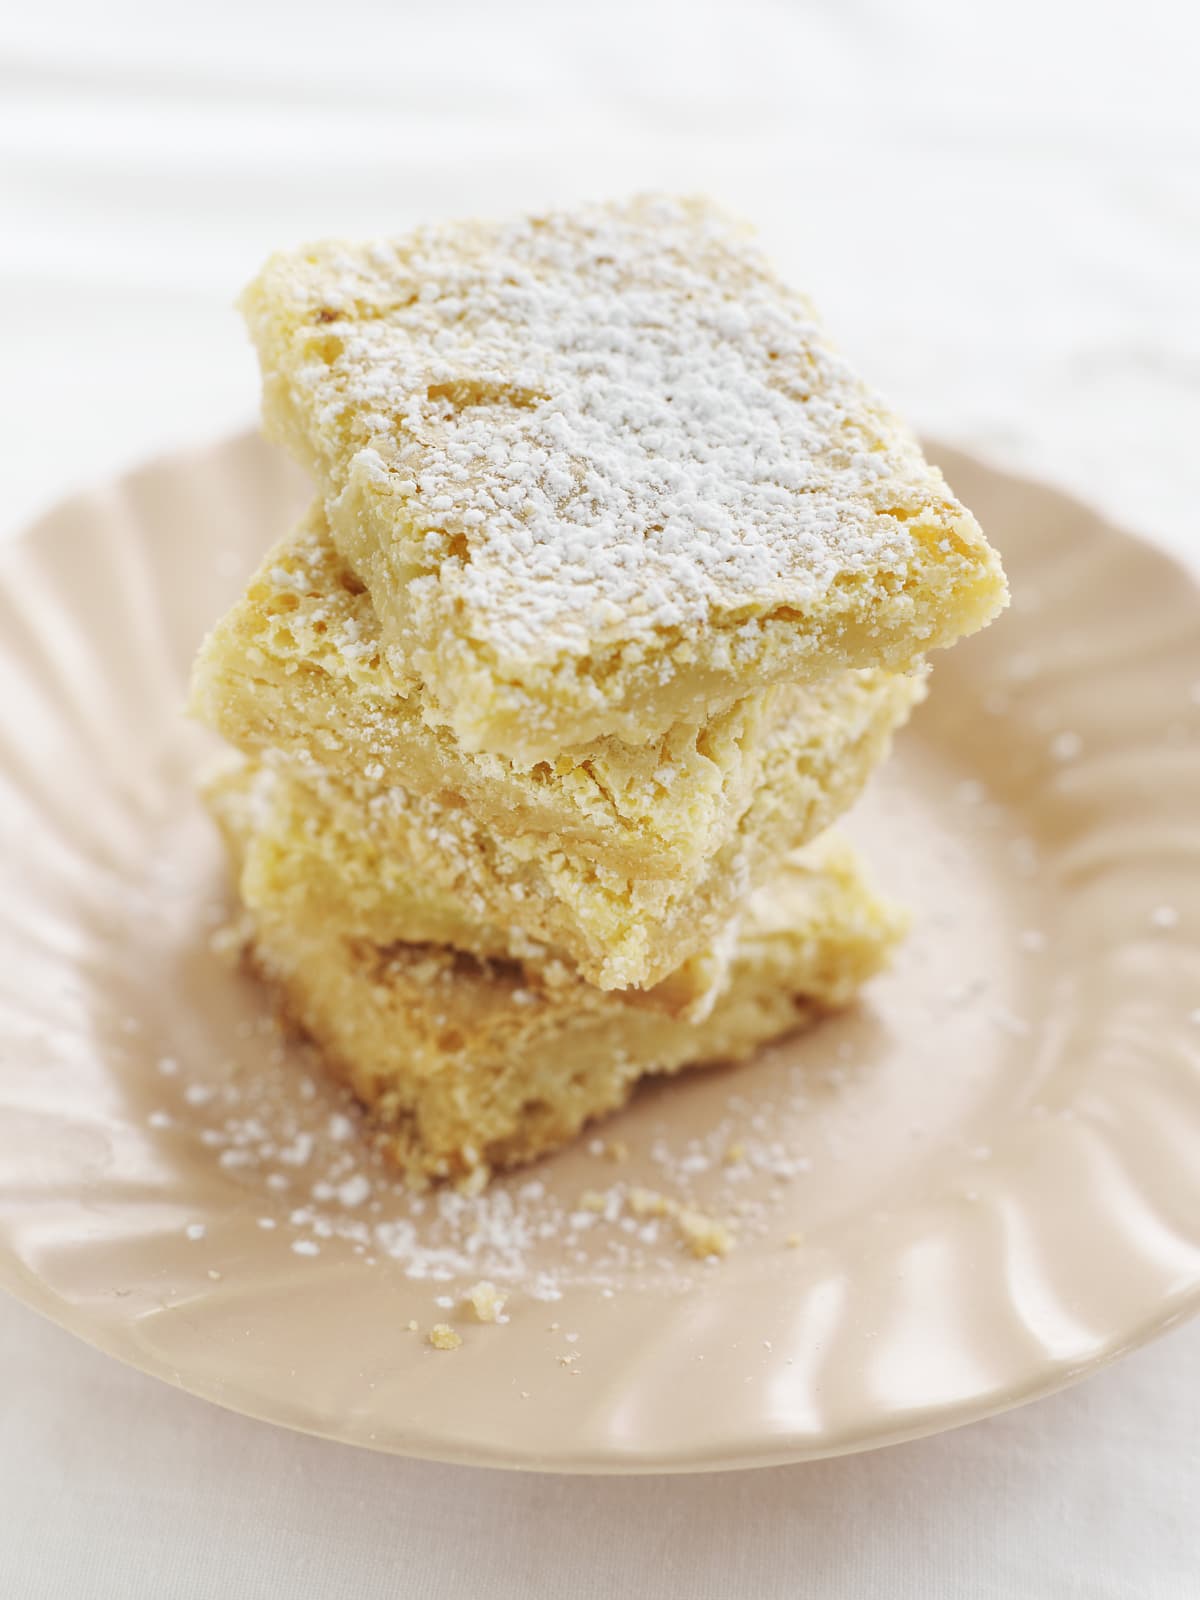 Lemon bars stacked on a plate